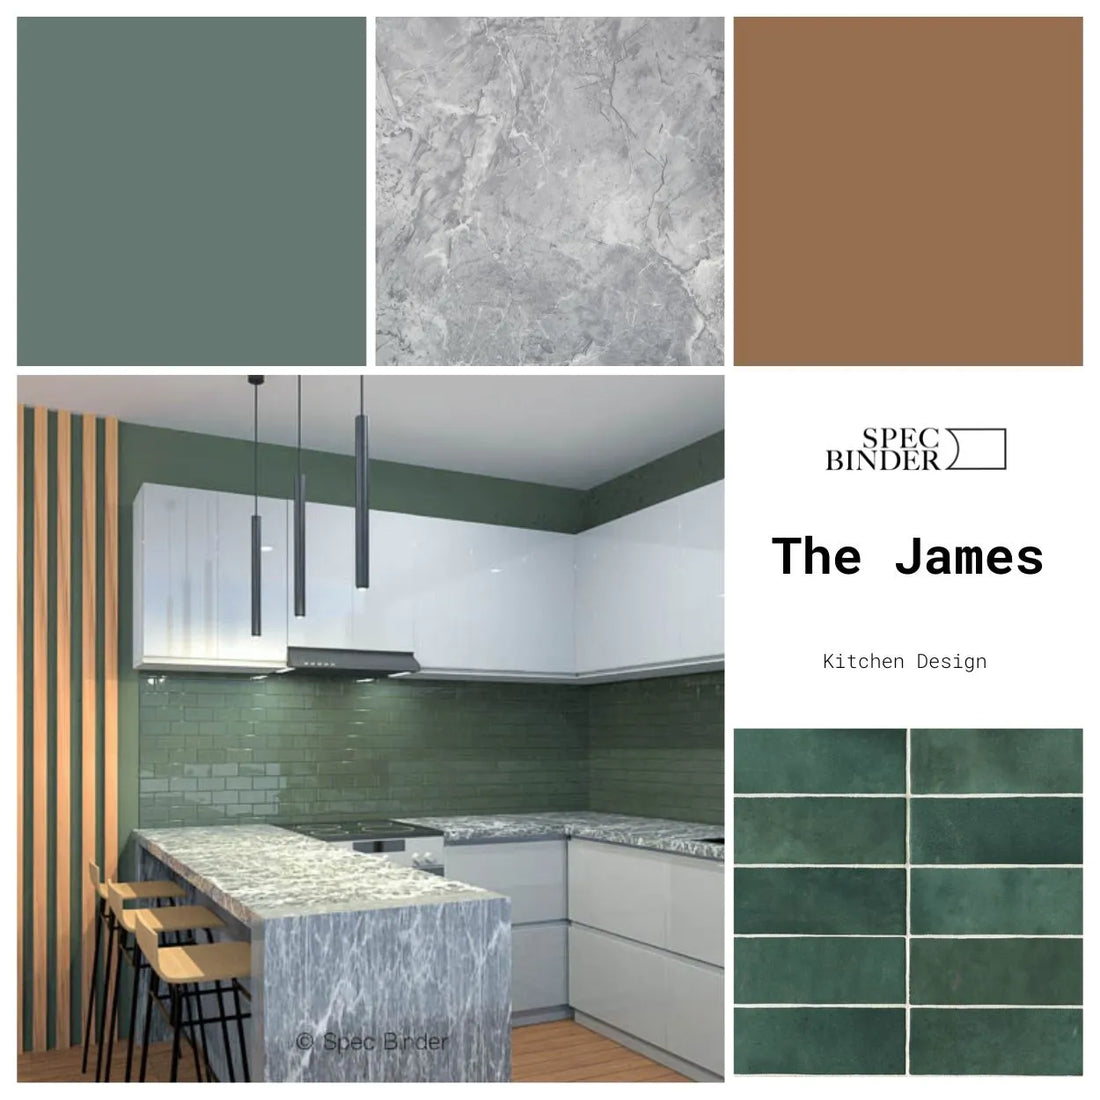 The James kitchen design cover page with inspiration photos, renderings, materials, and design elements. The James is dark, luxe, minimal, and modern.